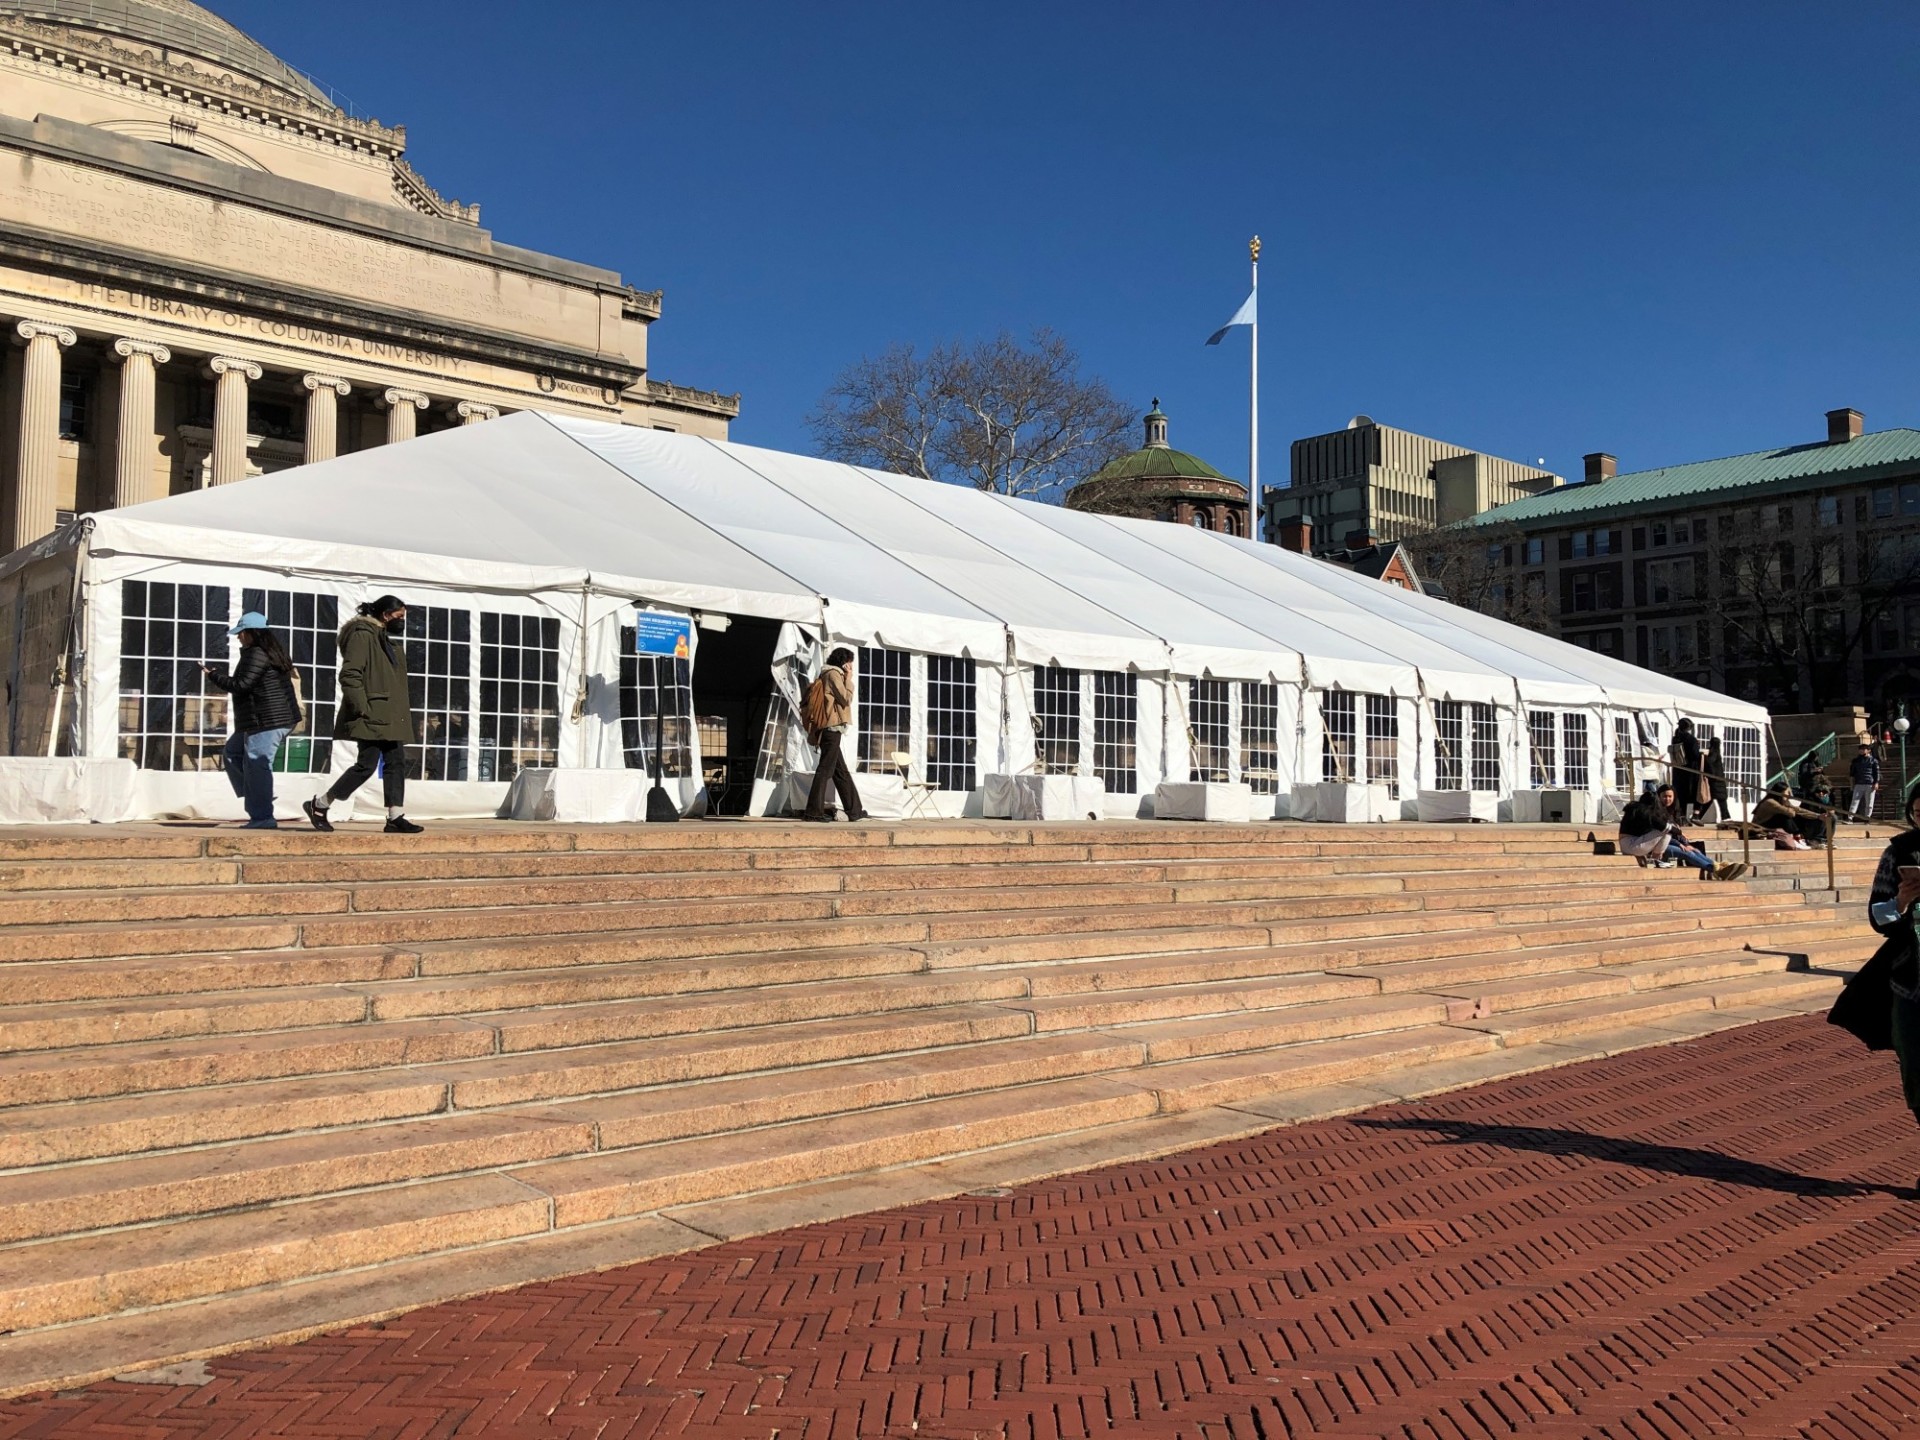 A white, outdoor tent erected at Low Plaza